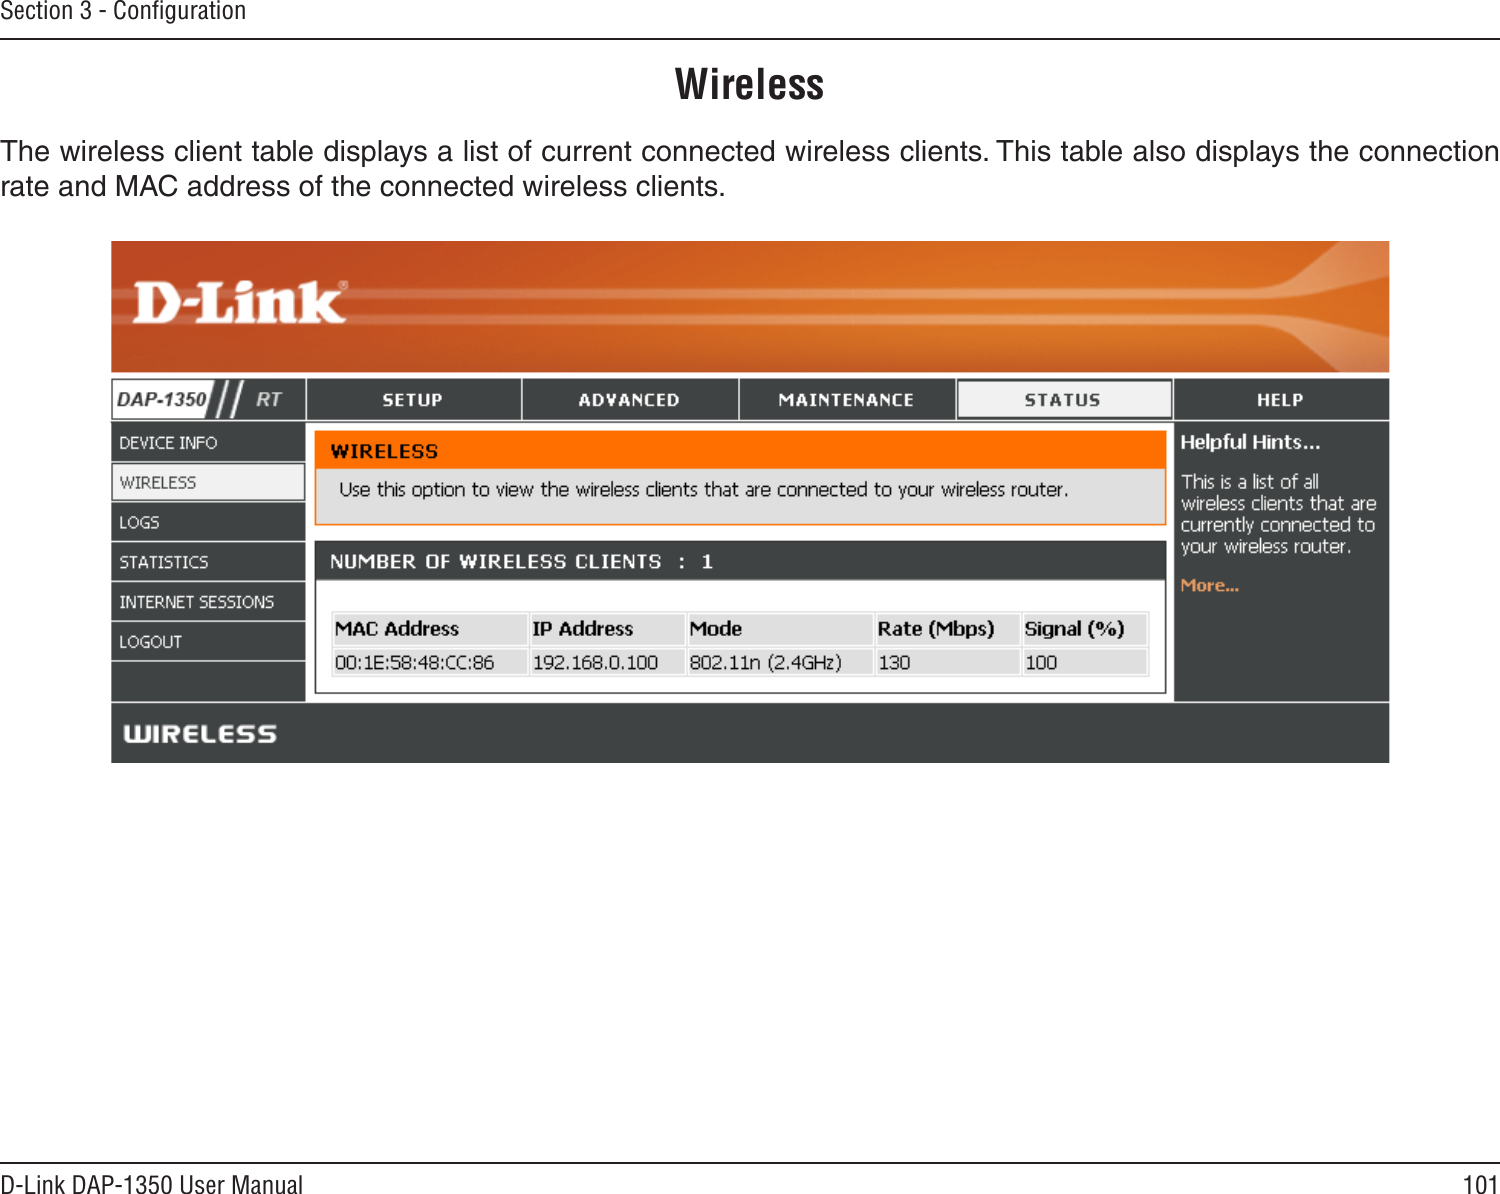 101D-Link DAP-1350 User ManualSection 3 - ConﬁgurationThe wireless client table displays a list of current connected wireless clients. This table also displays the connection rate and MAC address of the connected wireless clients.Wireless